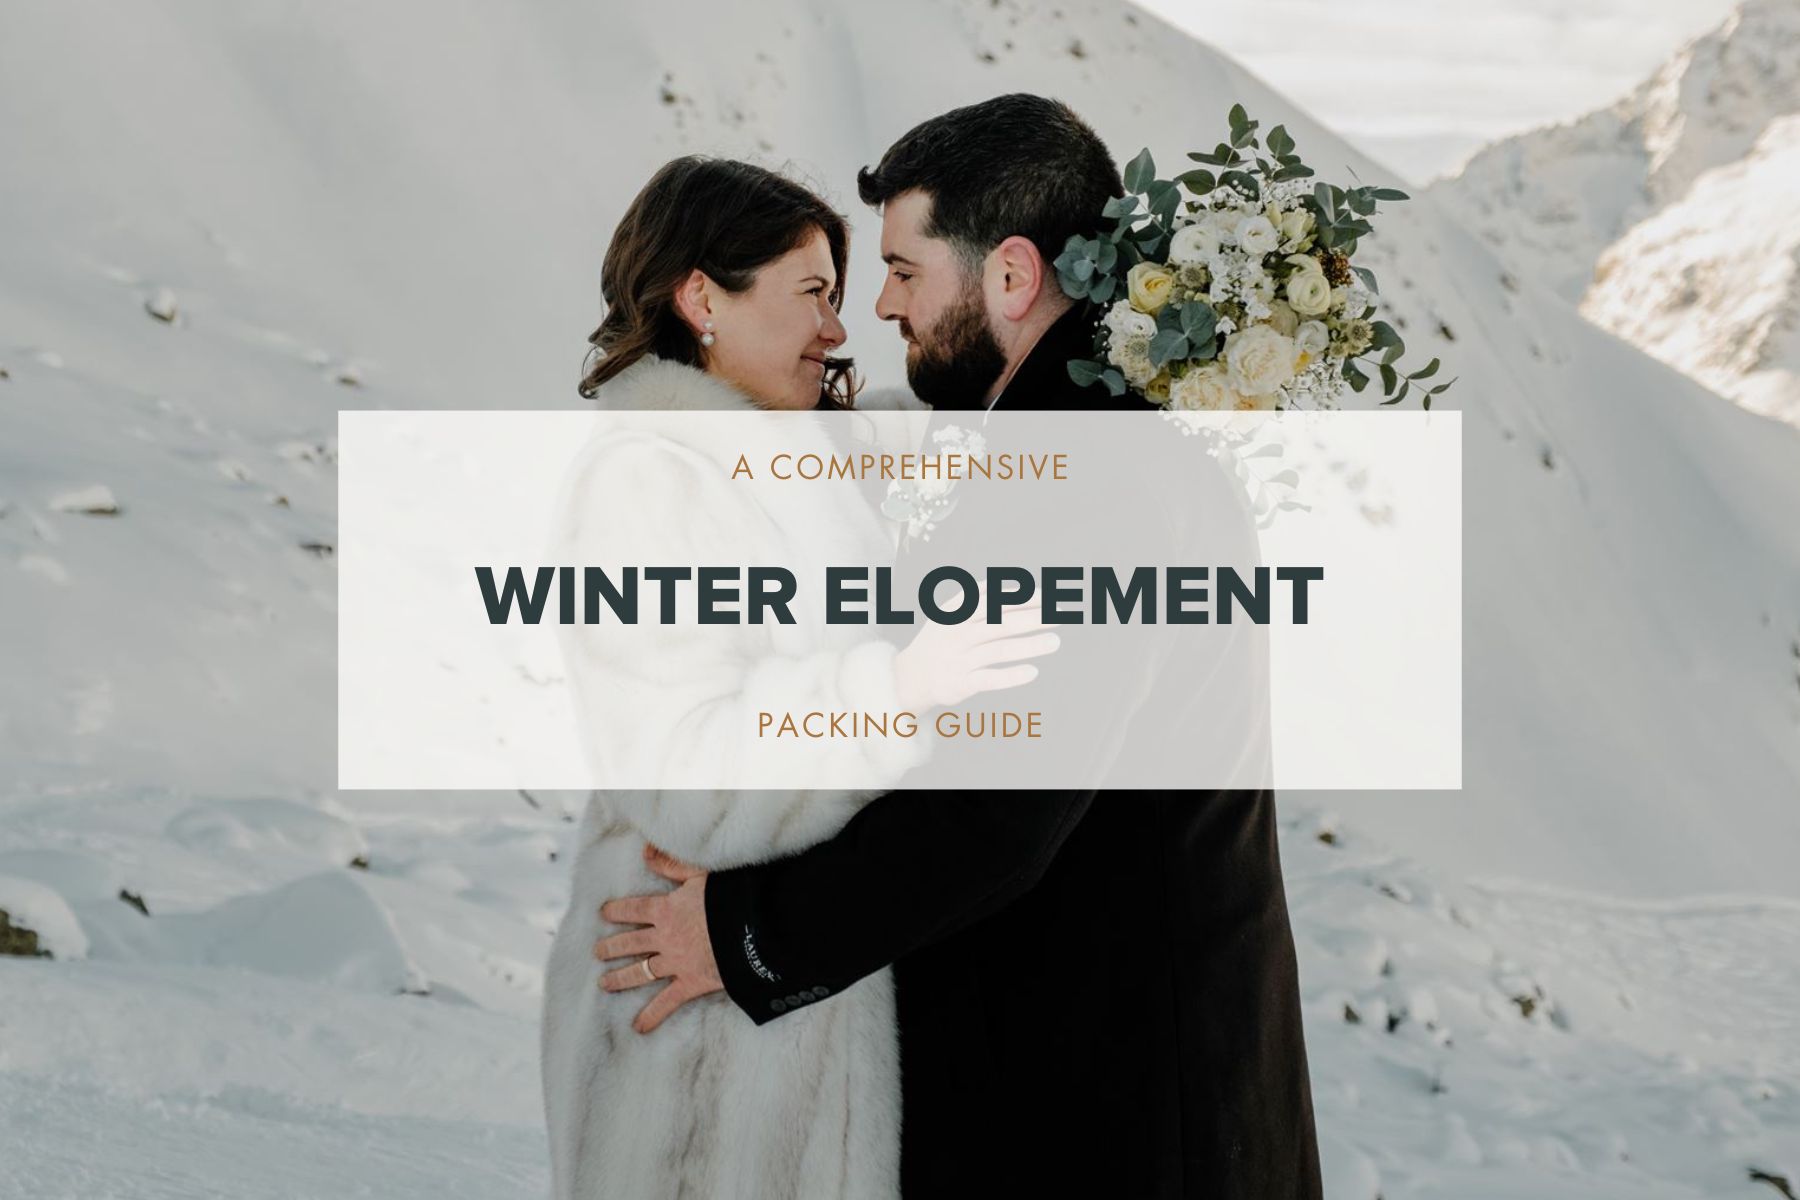 Winter Elopement Packing List – Everything You Need For A Winter Elopement